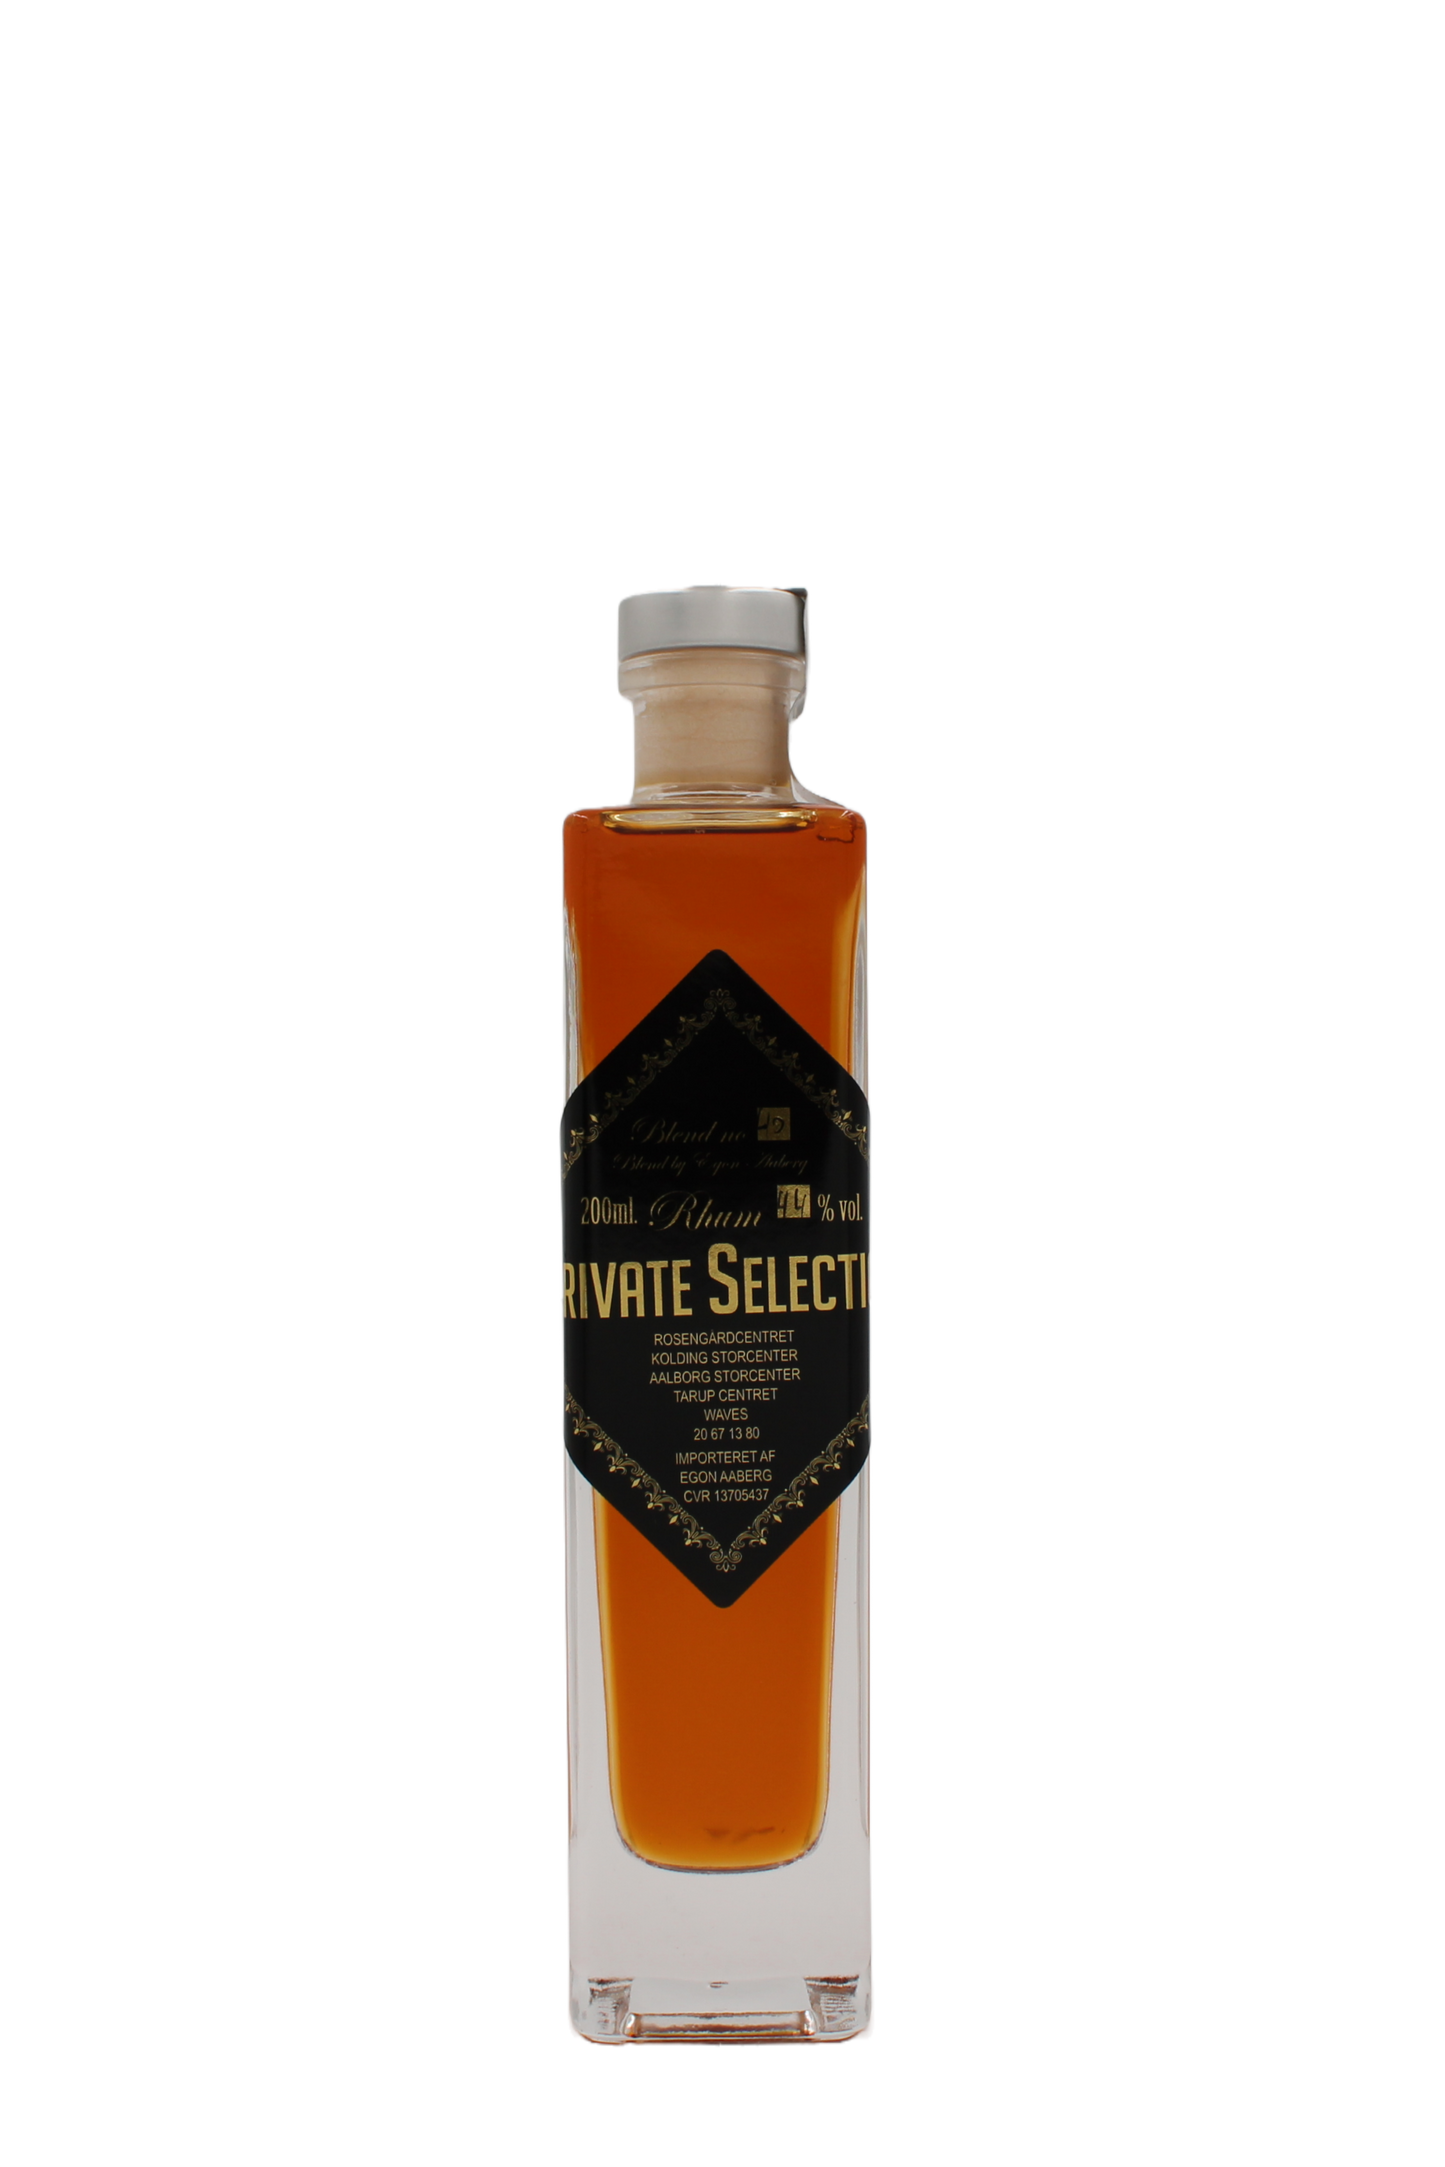 Private Selection - Blend no. 40 200ml